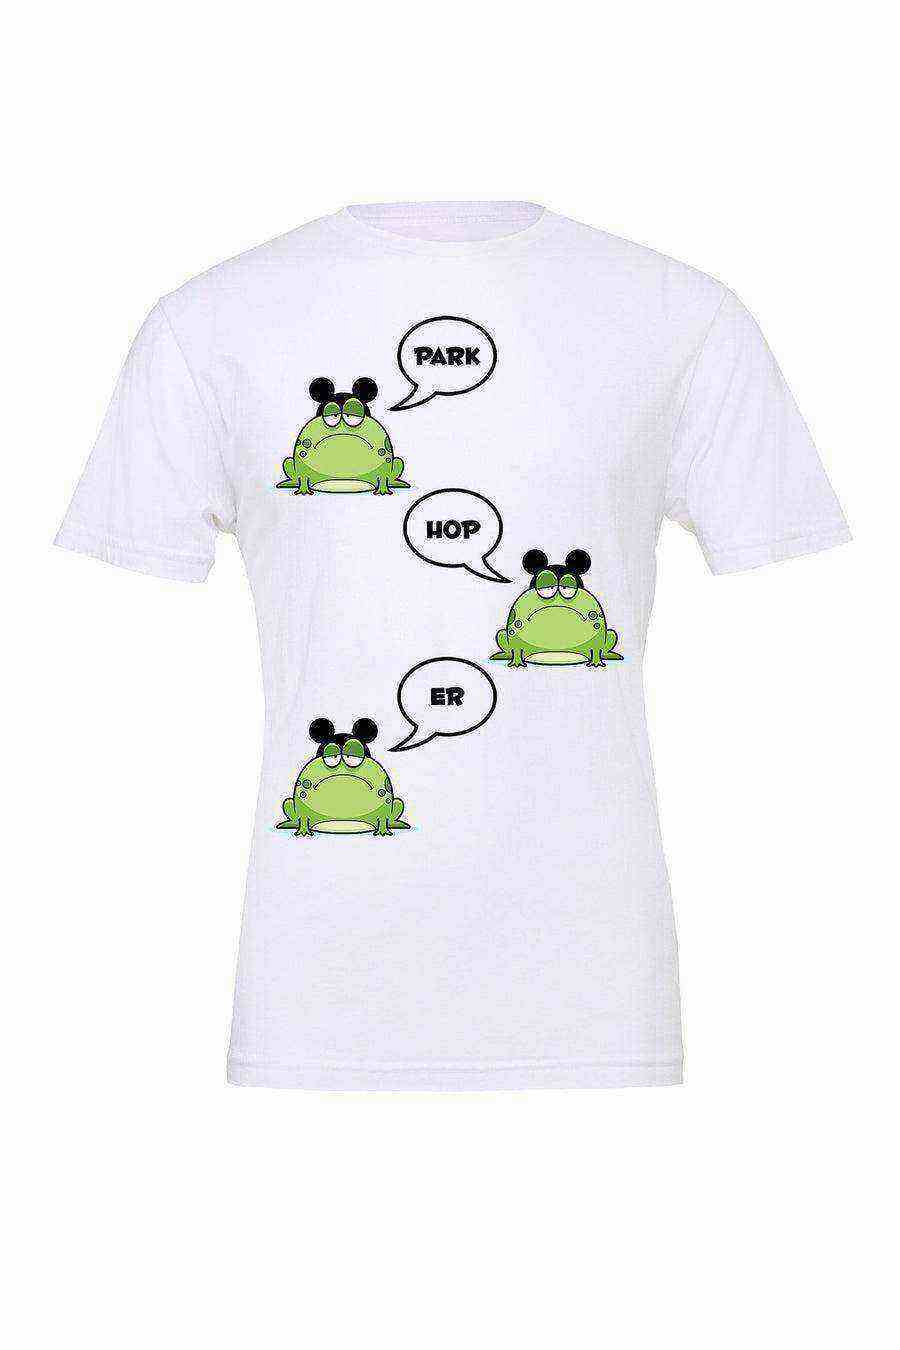 Youth | Park Hopper Frogs Shirt - Dylan's Tees